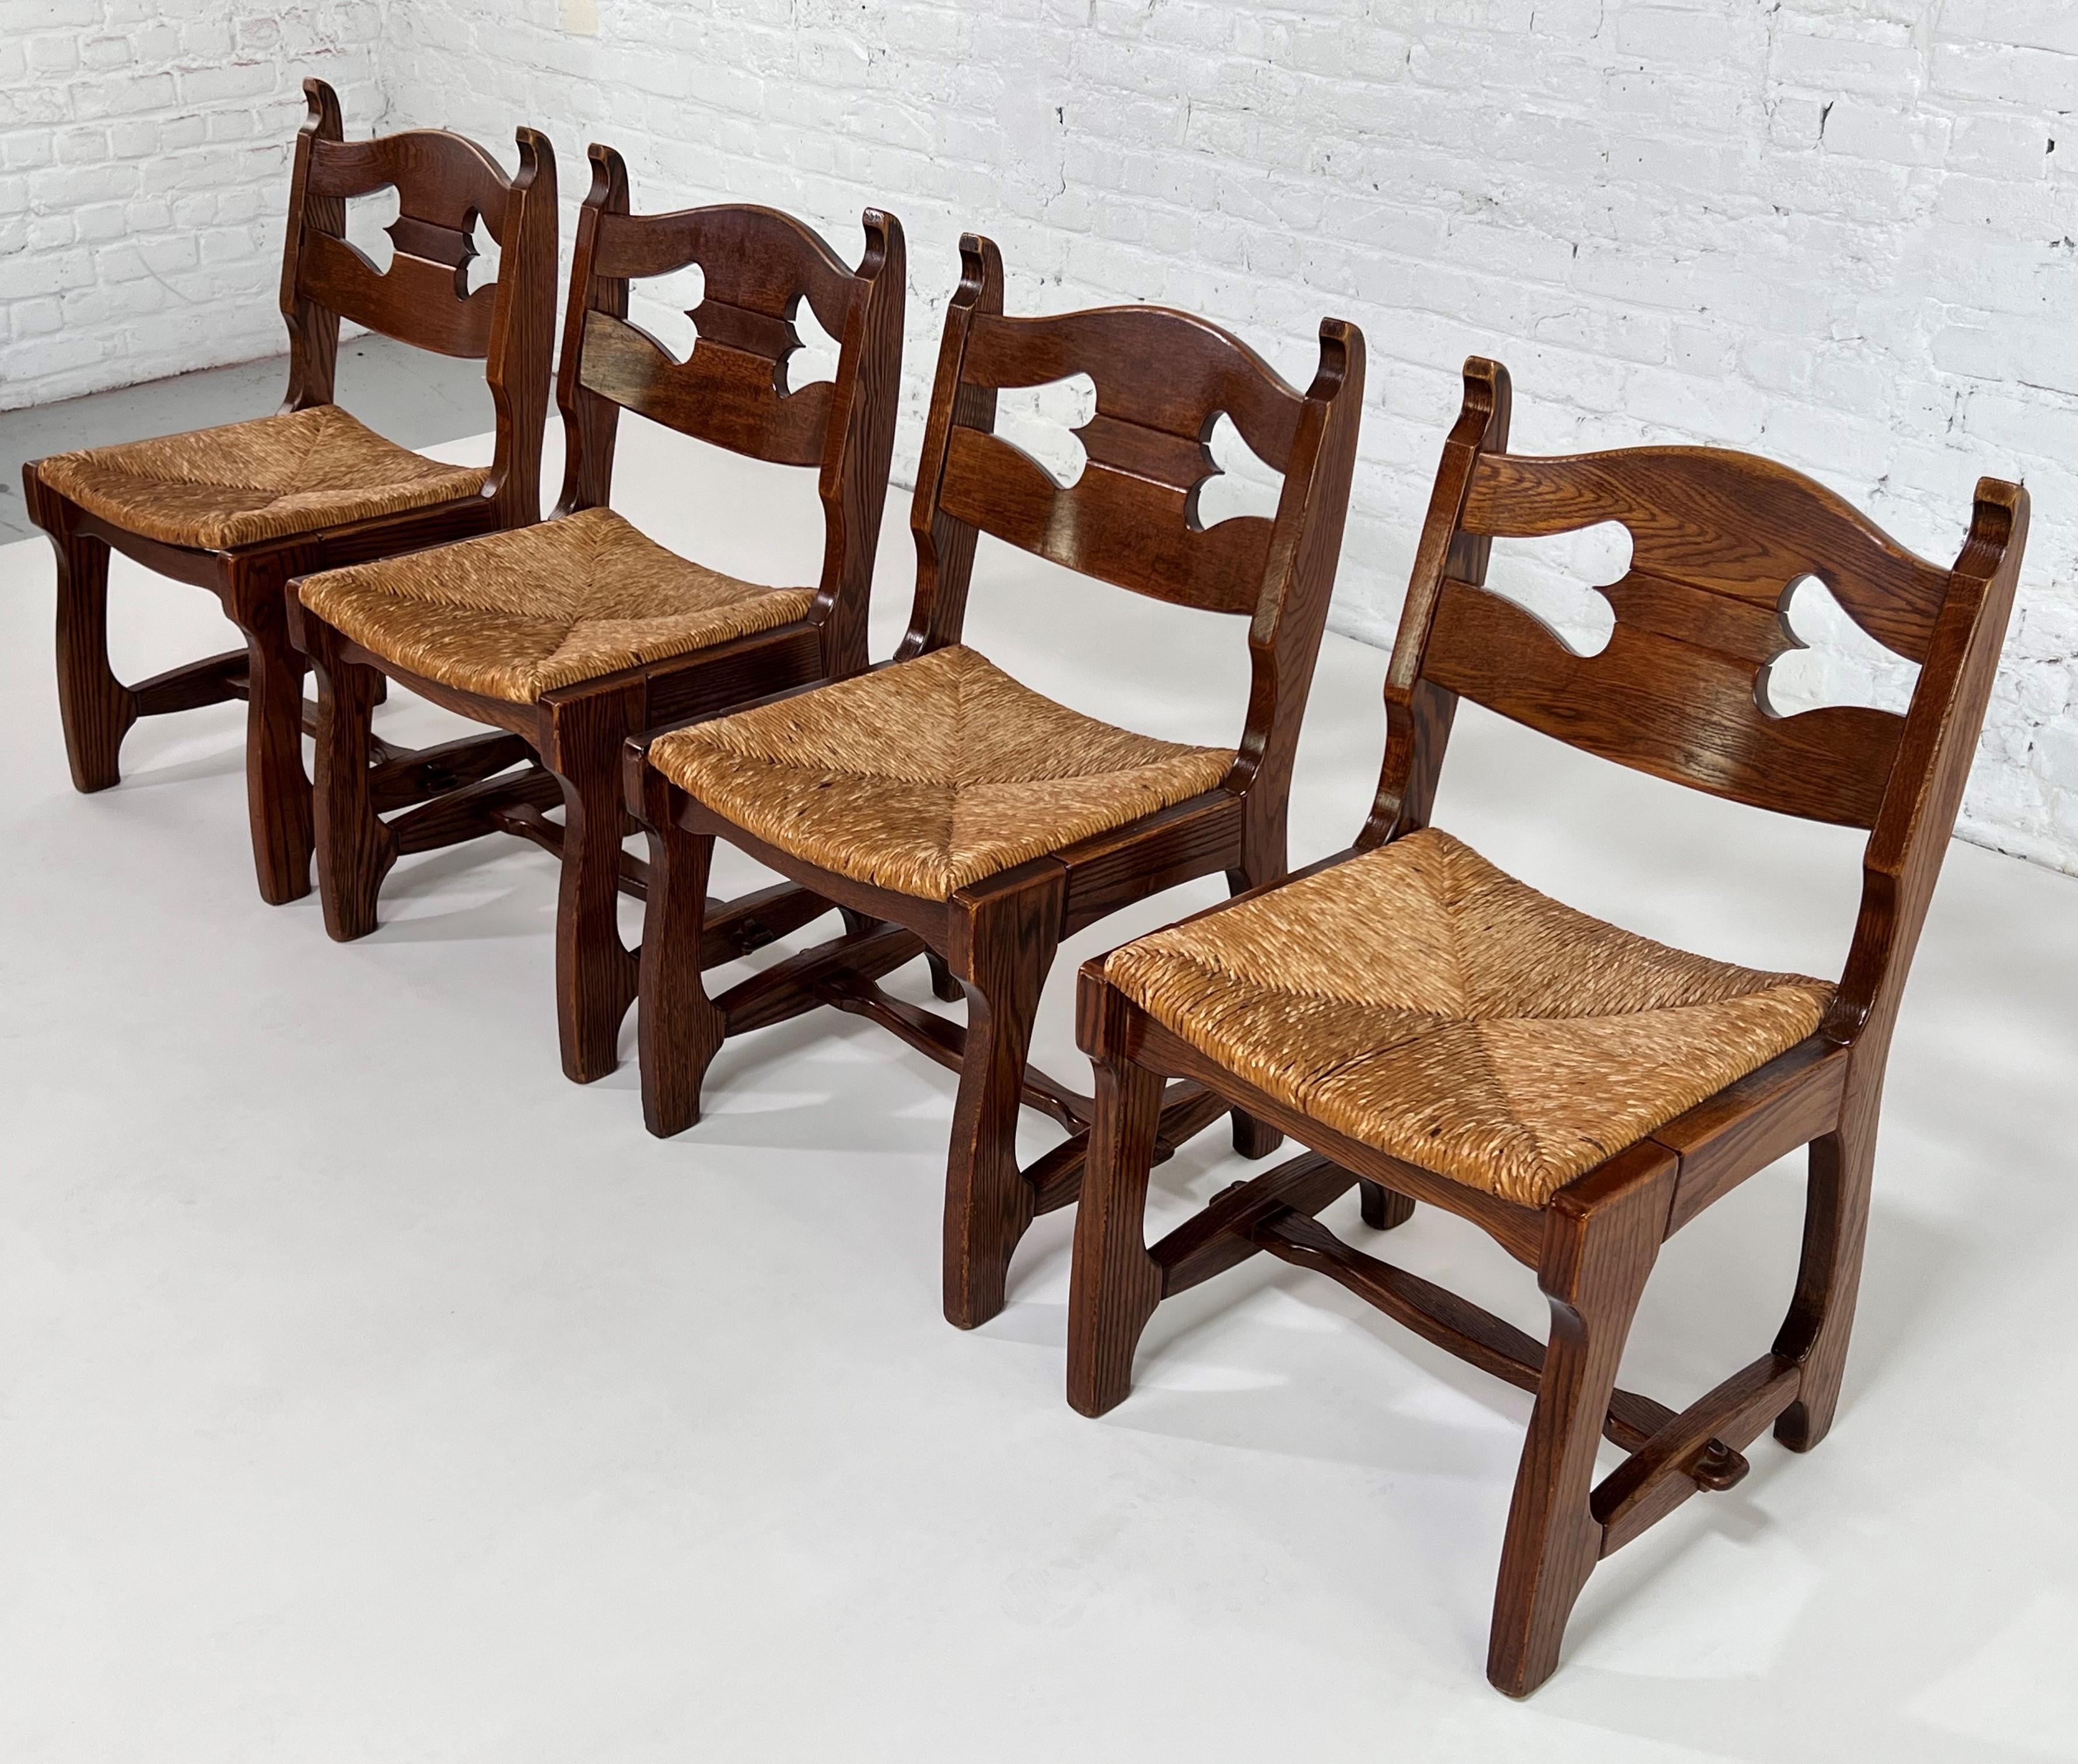 1950s Design Oak Wooden And Braided Straw Seats Set of 4 Chairs composed of a Brutalist wooden structure adorned with a braided straw seat.